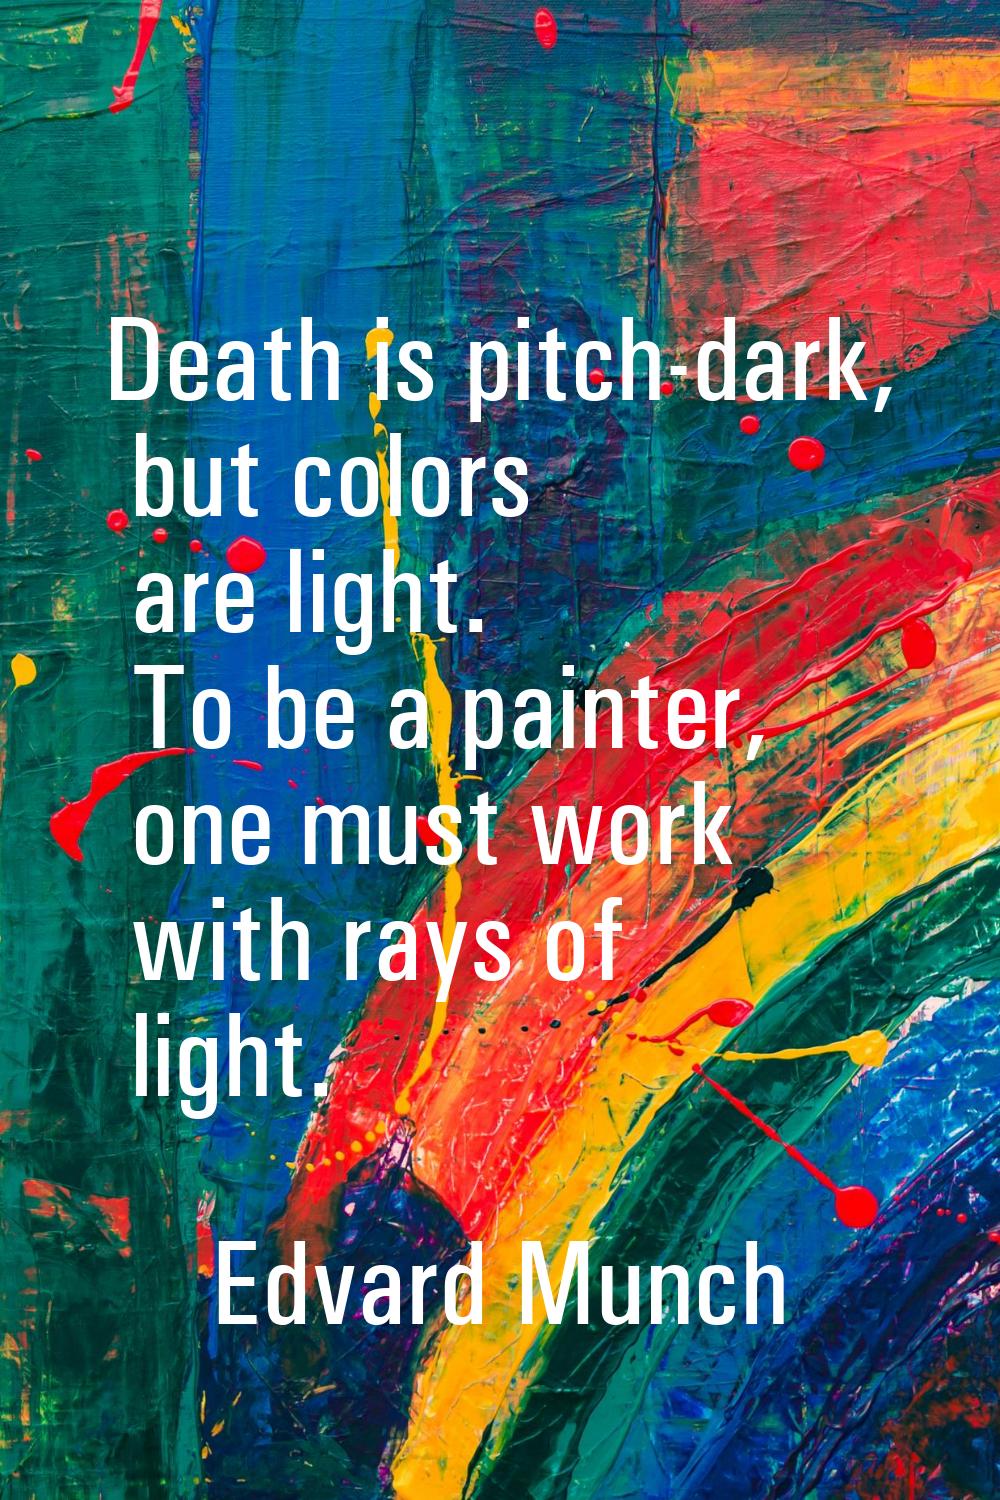 Death is pitch-dark, but colors are light. To be a painter, one must work with rays of light.